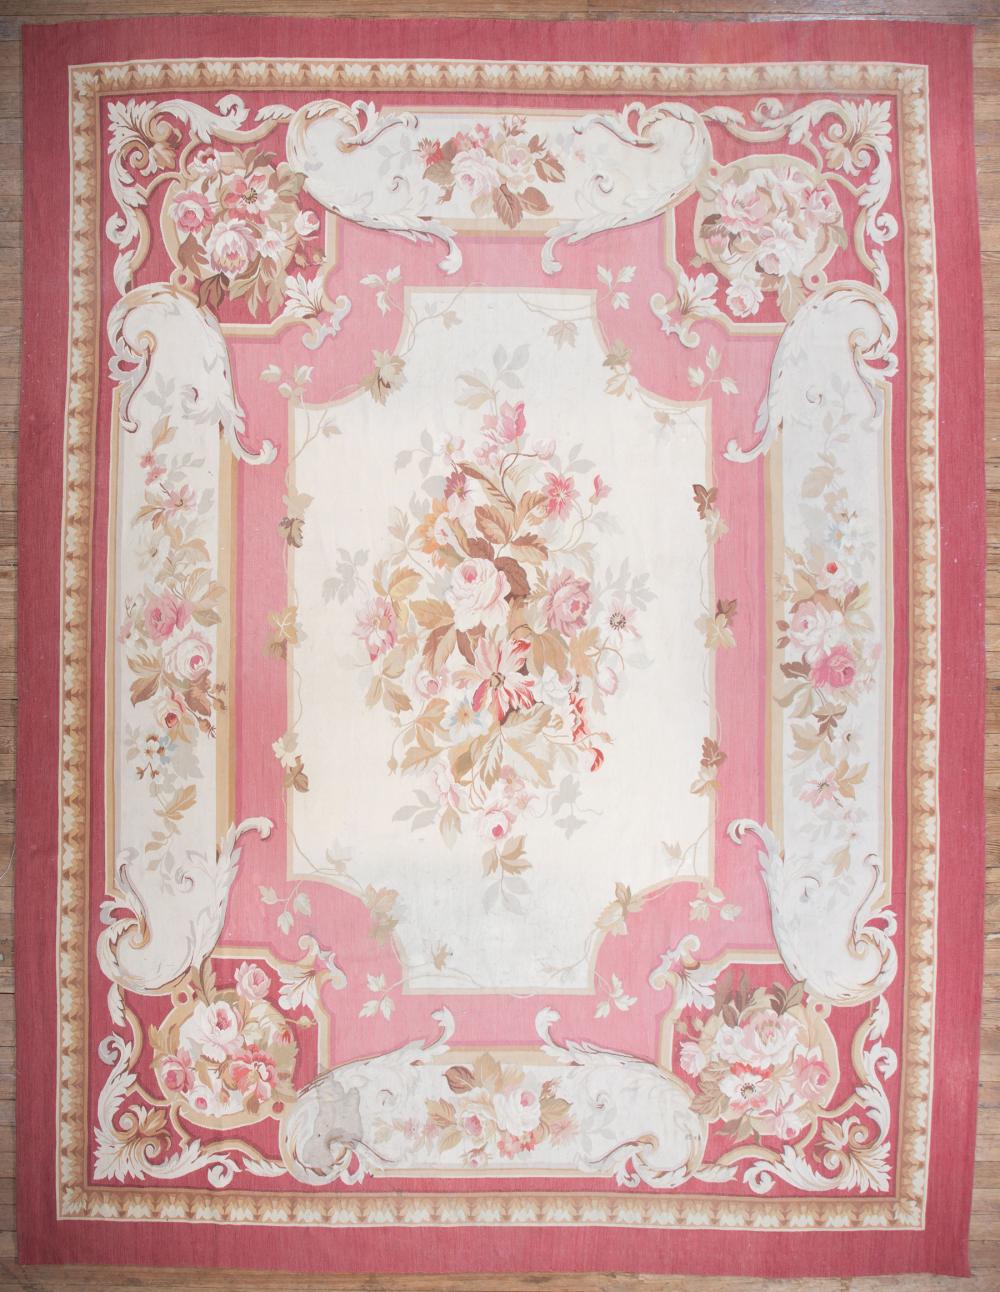 FRENCH AUBUSSON-STYLE CARPETFrench